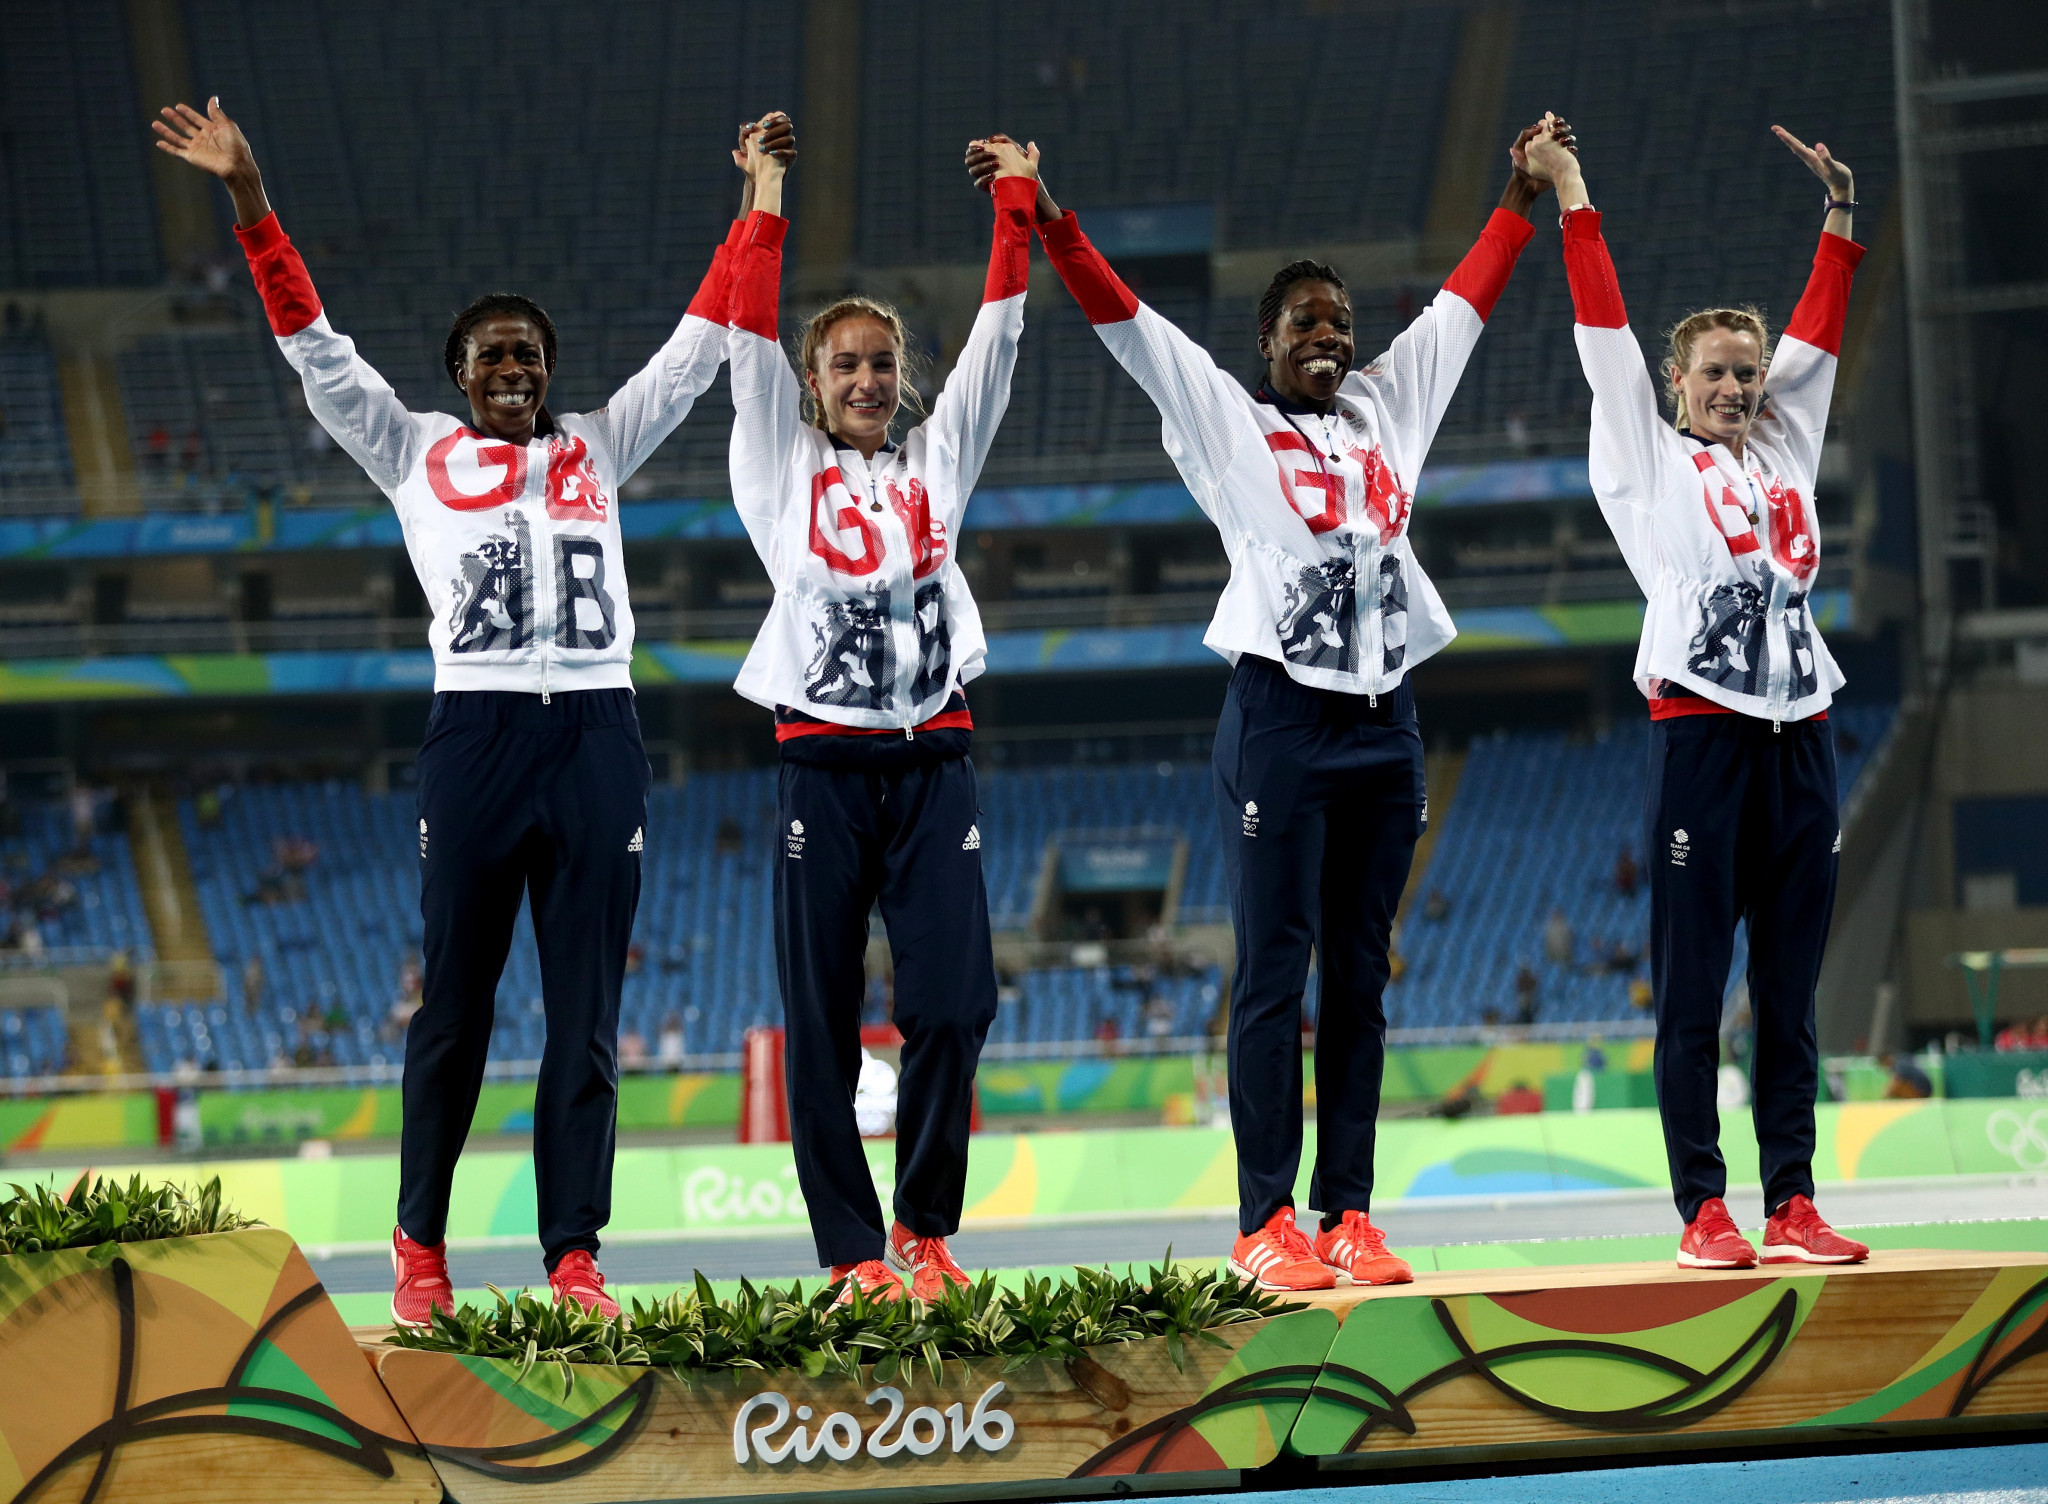 Christine Ohuruogu's last major championship medal came at the Rio 2016 Olympics when she won bronze in the 4x400m relay alongside, from left to right, Emily Diamond, Anyika Onoura and Elidh Doyle ©Getty Images